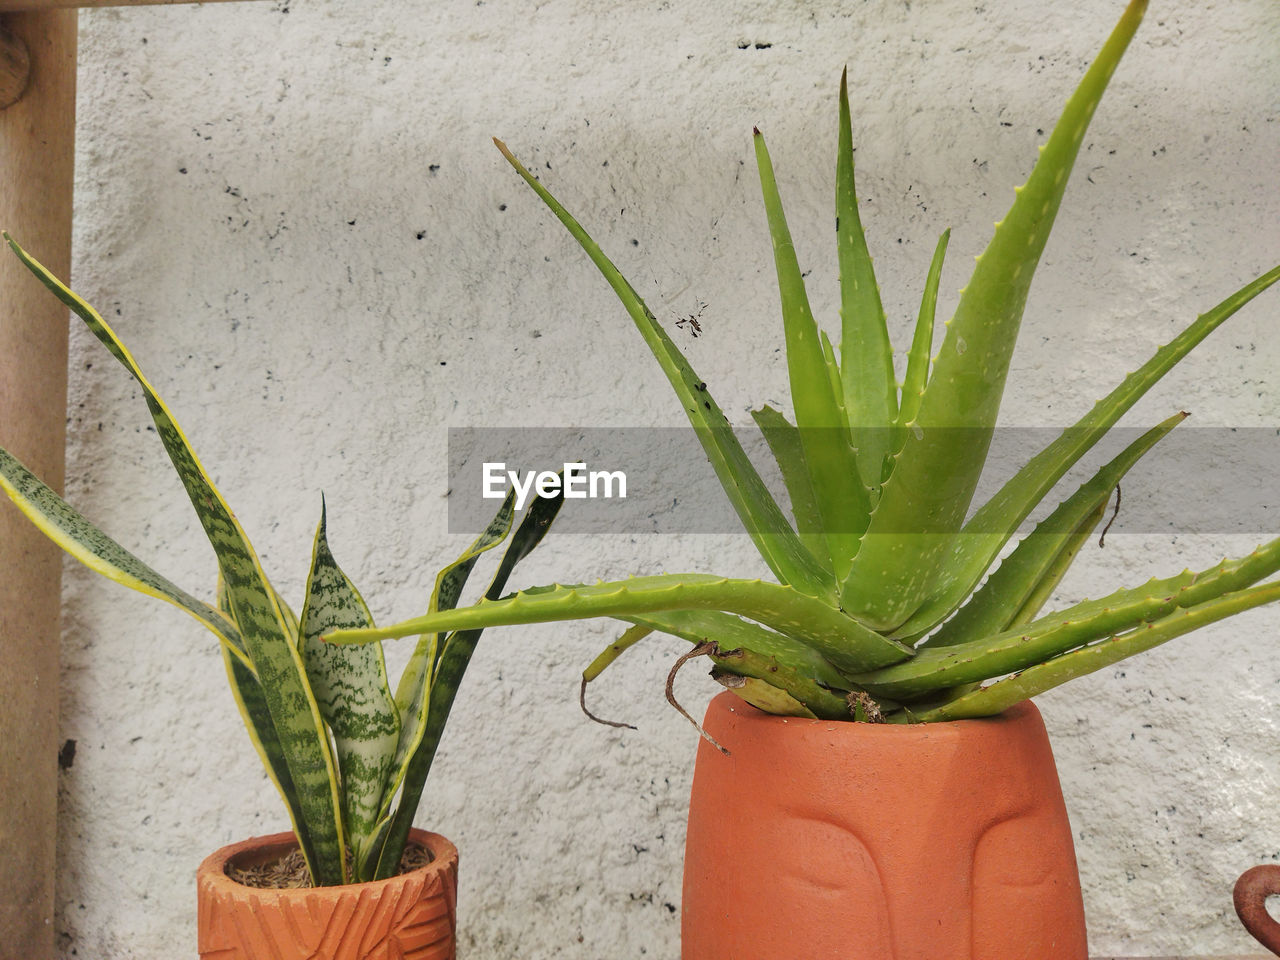 plant, growth, potted plant, plant stem, aloe, nature, flower, wall - building feature, green, flowerpot, no people, houseplant, xanthorrhoeaceae, aloe vera plant, succulent plant, agave, outdoors, cactus, day, leaf, plant part, freshness, botany, beauty in nature, food, close-up, food and drink